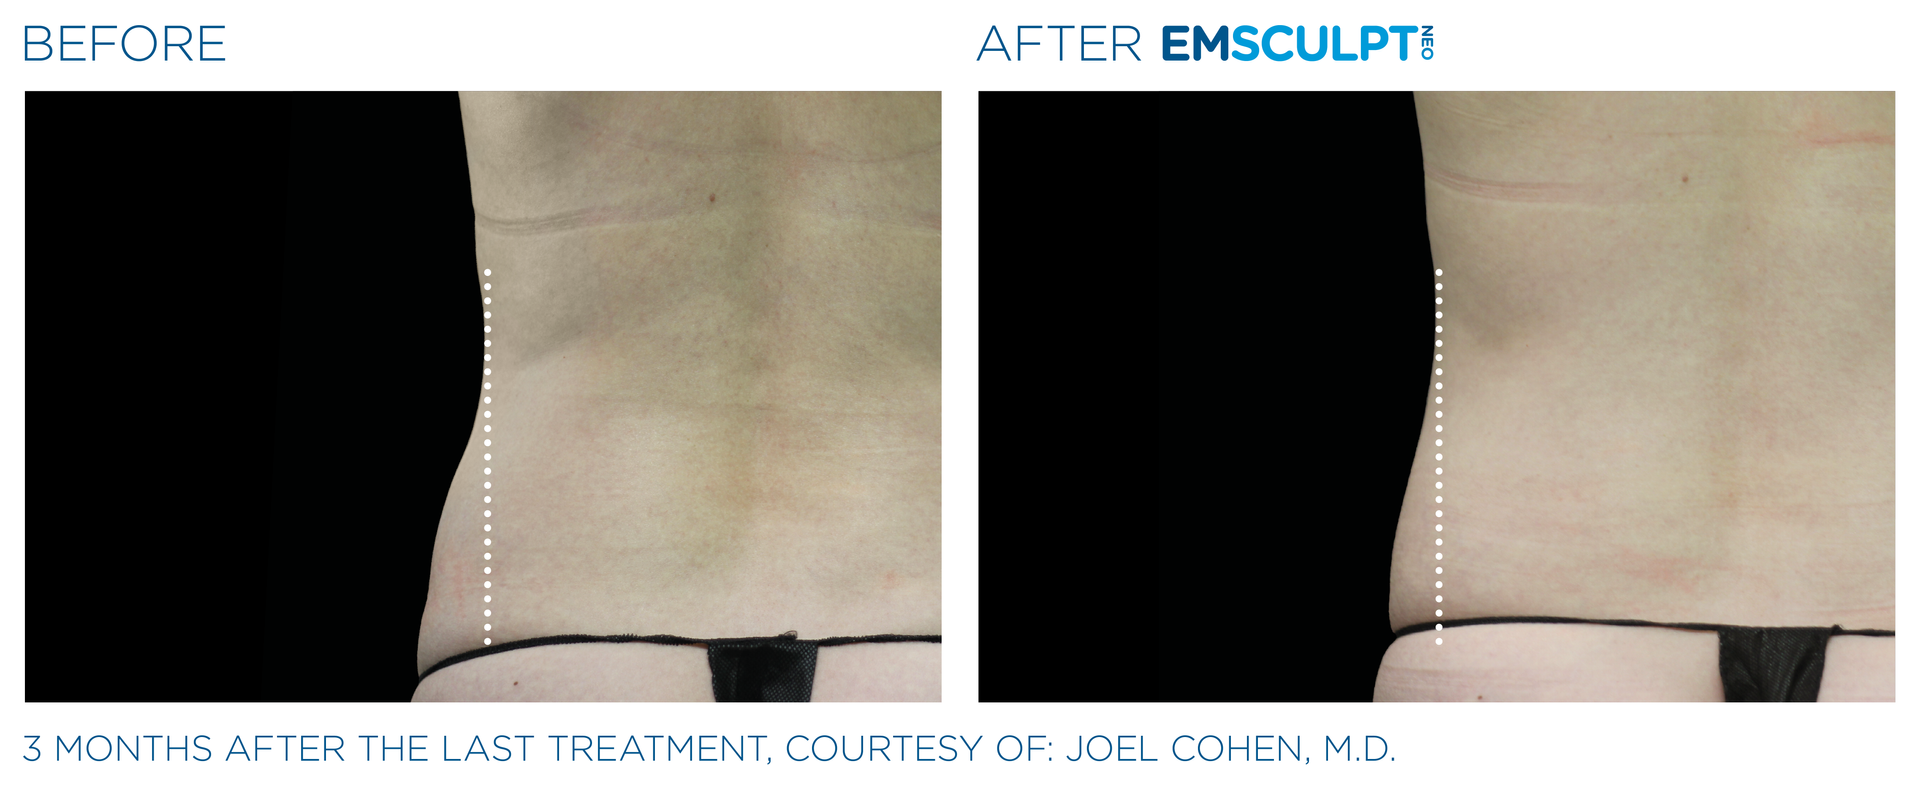 Female love handle results with Emsculpt neo at Dr. Mantor's Wrinkle and Weight Solutions in Westerville, OH book your free trial today!